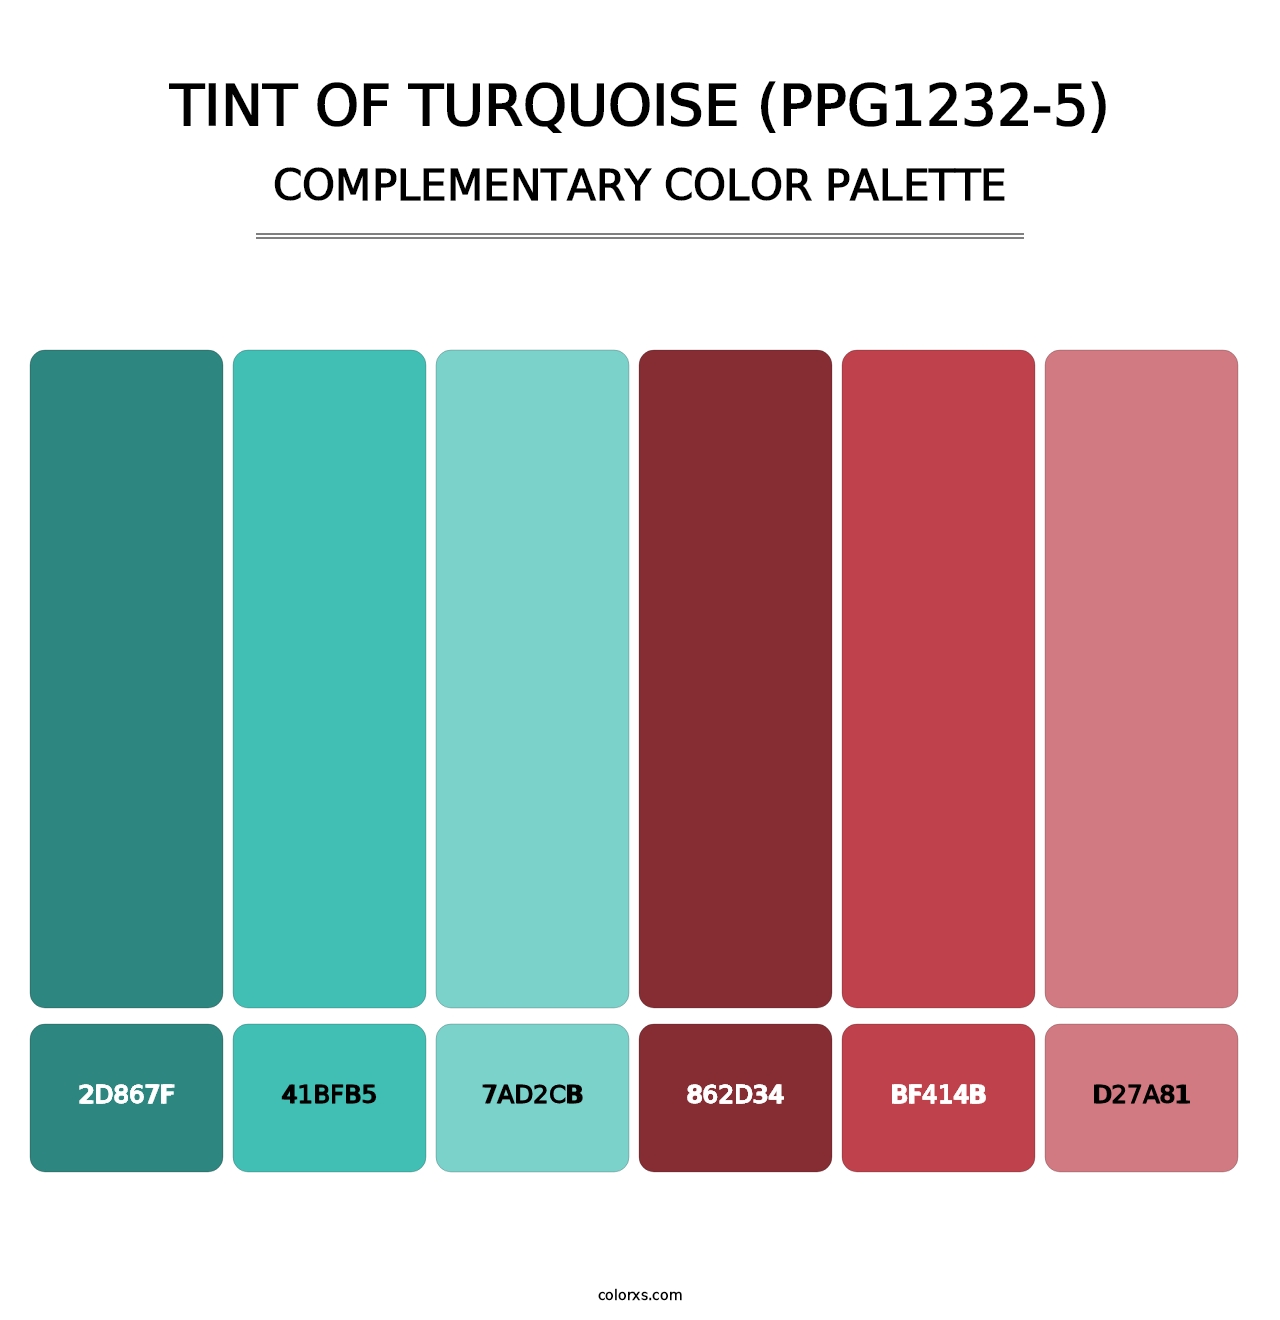 Tint Of Turquoise (PPG1232-5) - Complementary Color Palette